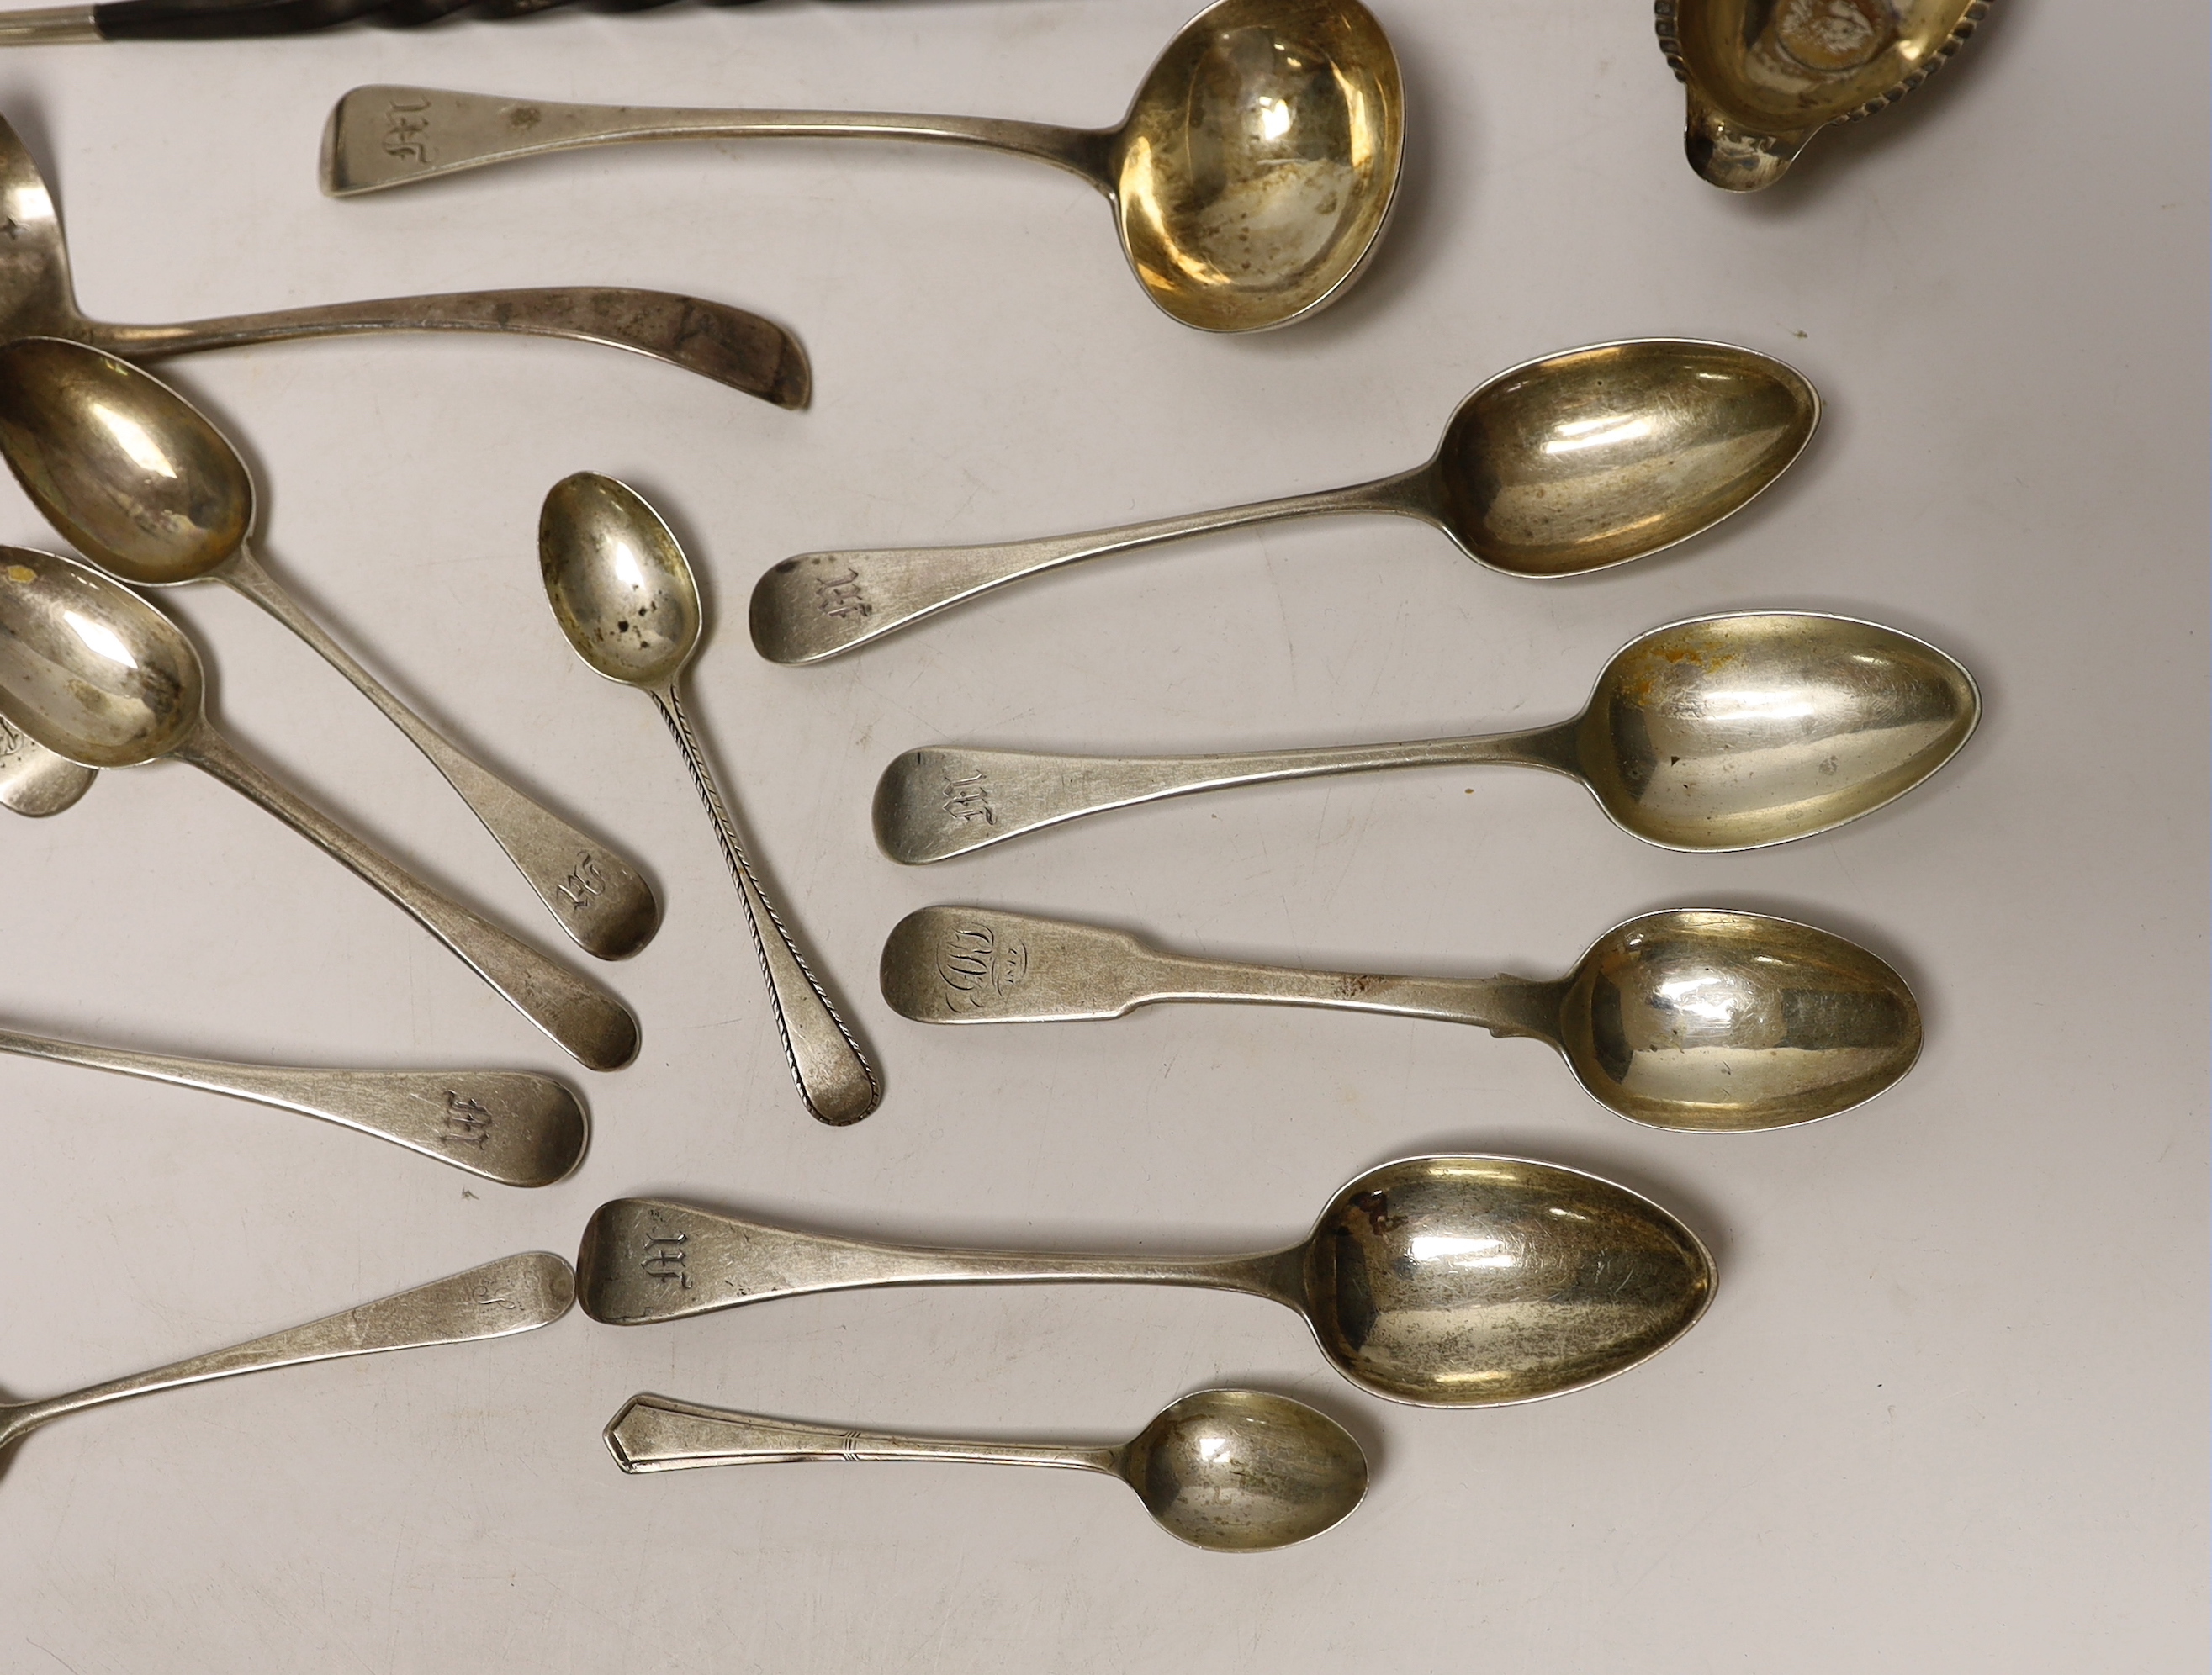 Two 19th century toddy ladles, including Scottish silver and a small quantity of assorted 19th century silver flatware, 15oz.